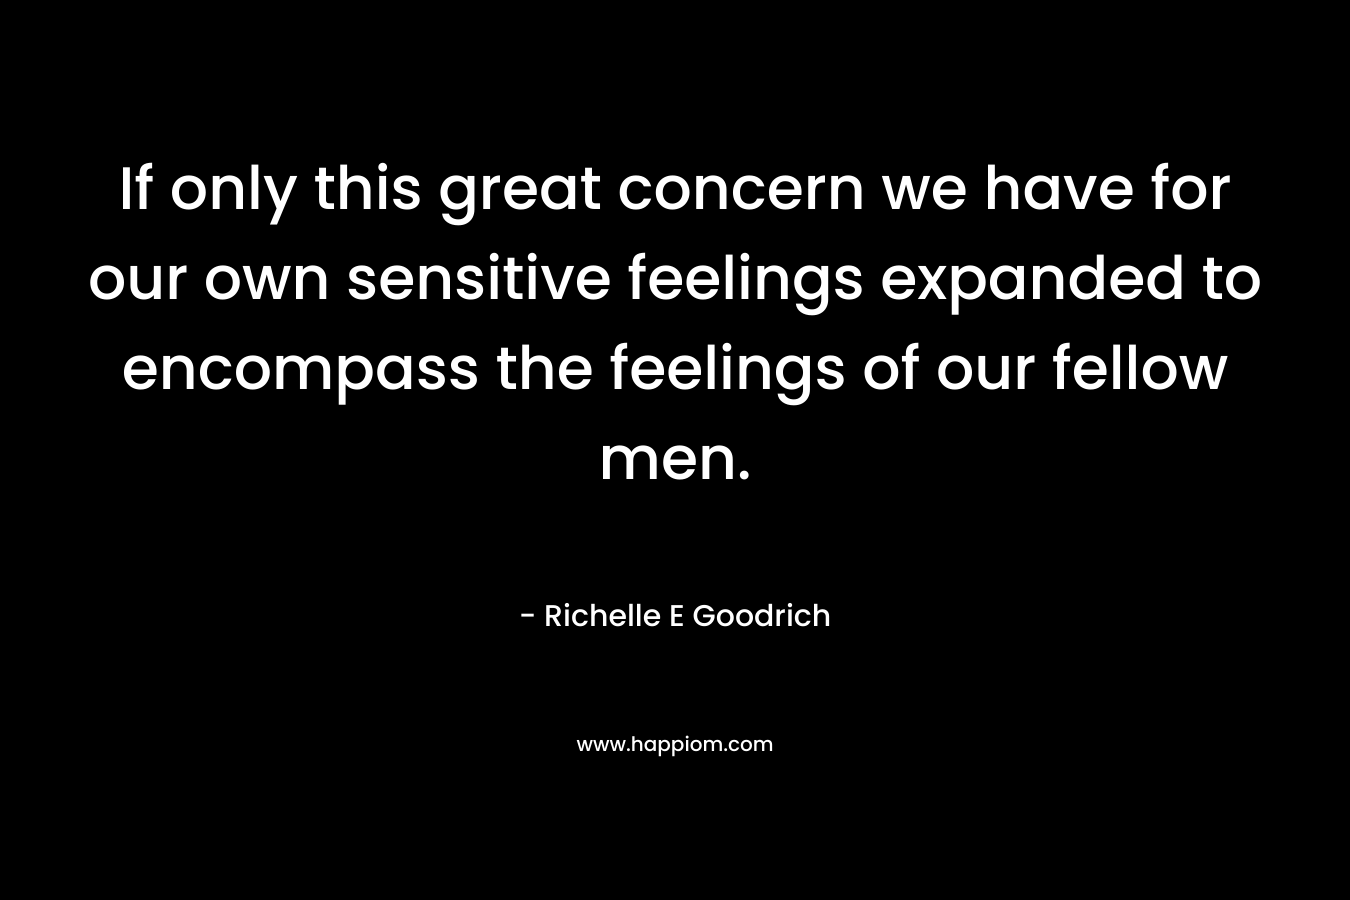 If only this great concern we have for our own sensitive feelings expanded to encompass the feelings of our fellow men.